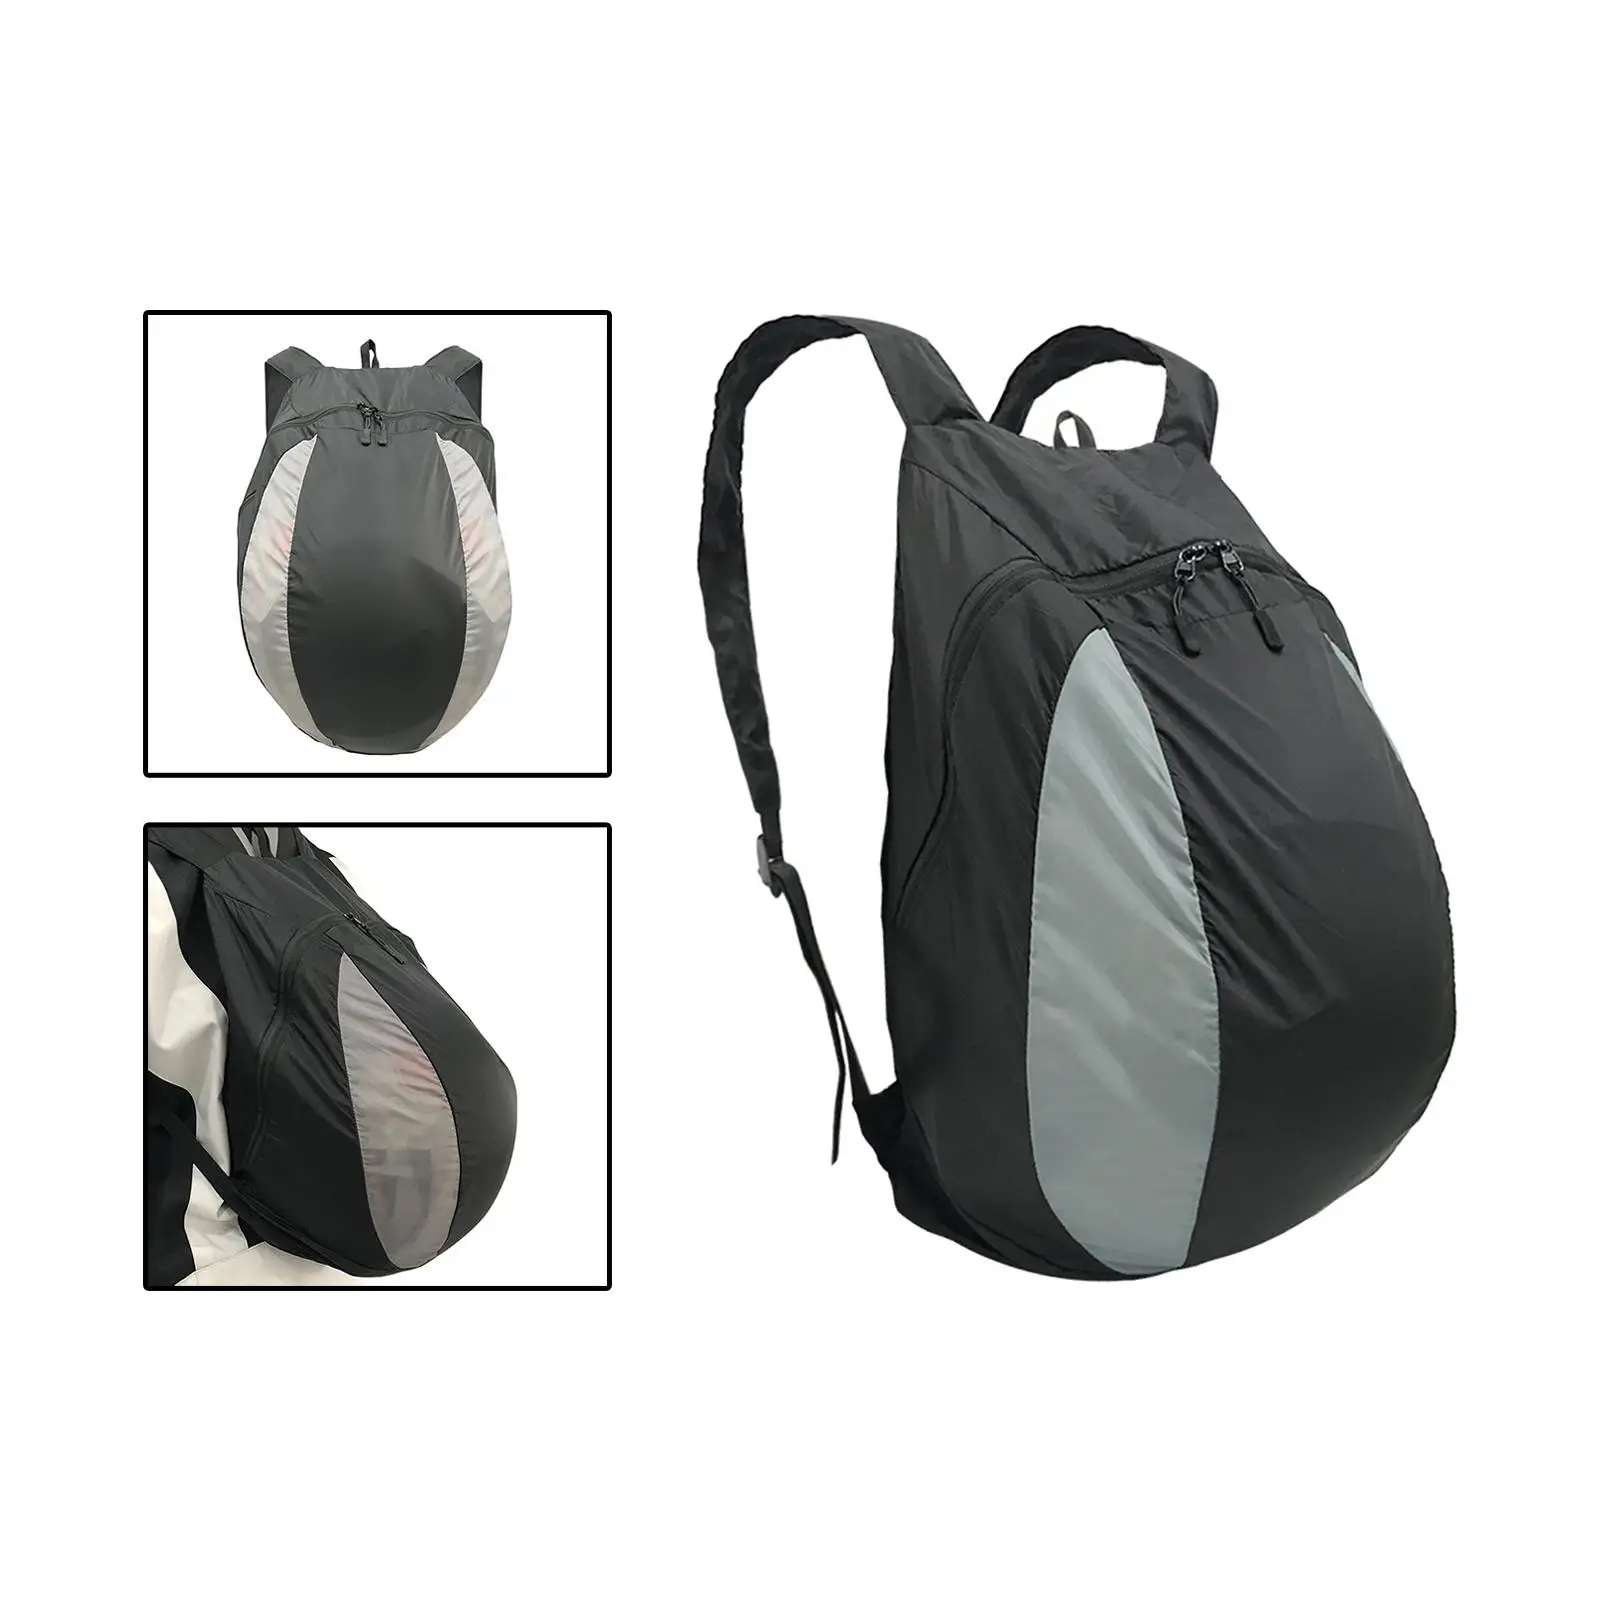 Basketball Shoulder Bag Wear Resistant Accessories Football Bag Motorcycle Backpack Bag for Study Sports Clothes Boys Girls